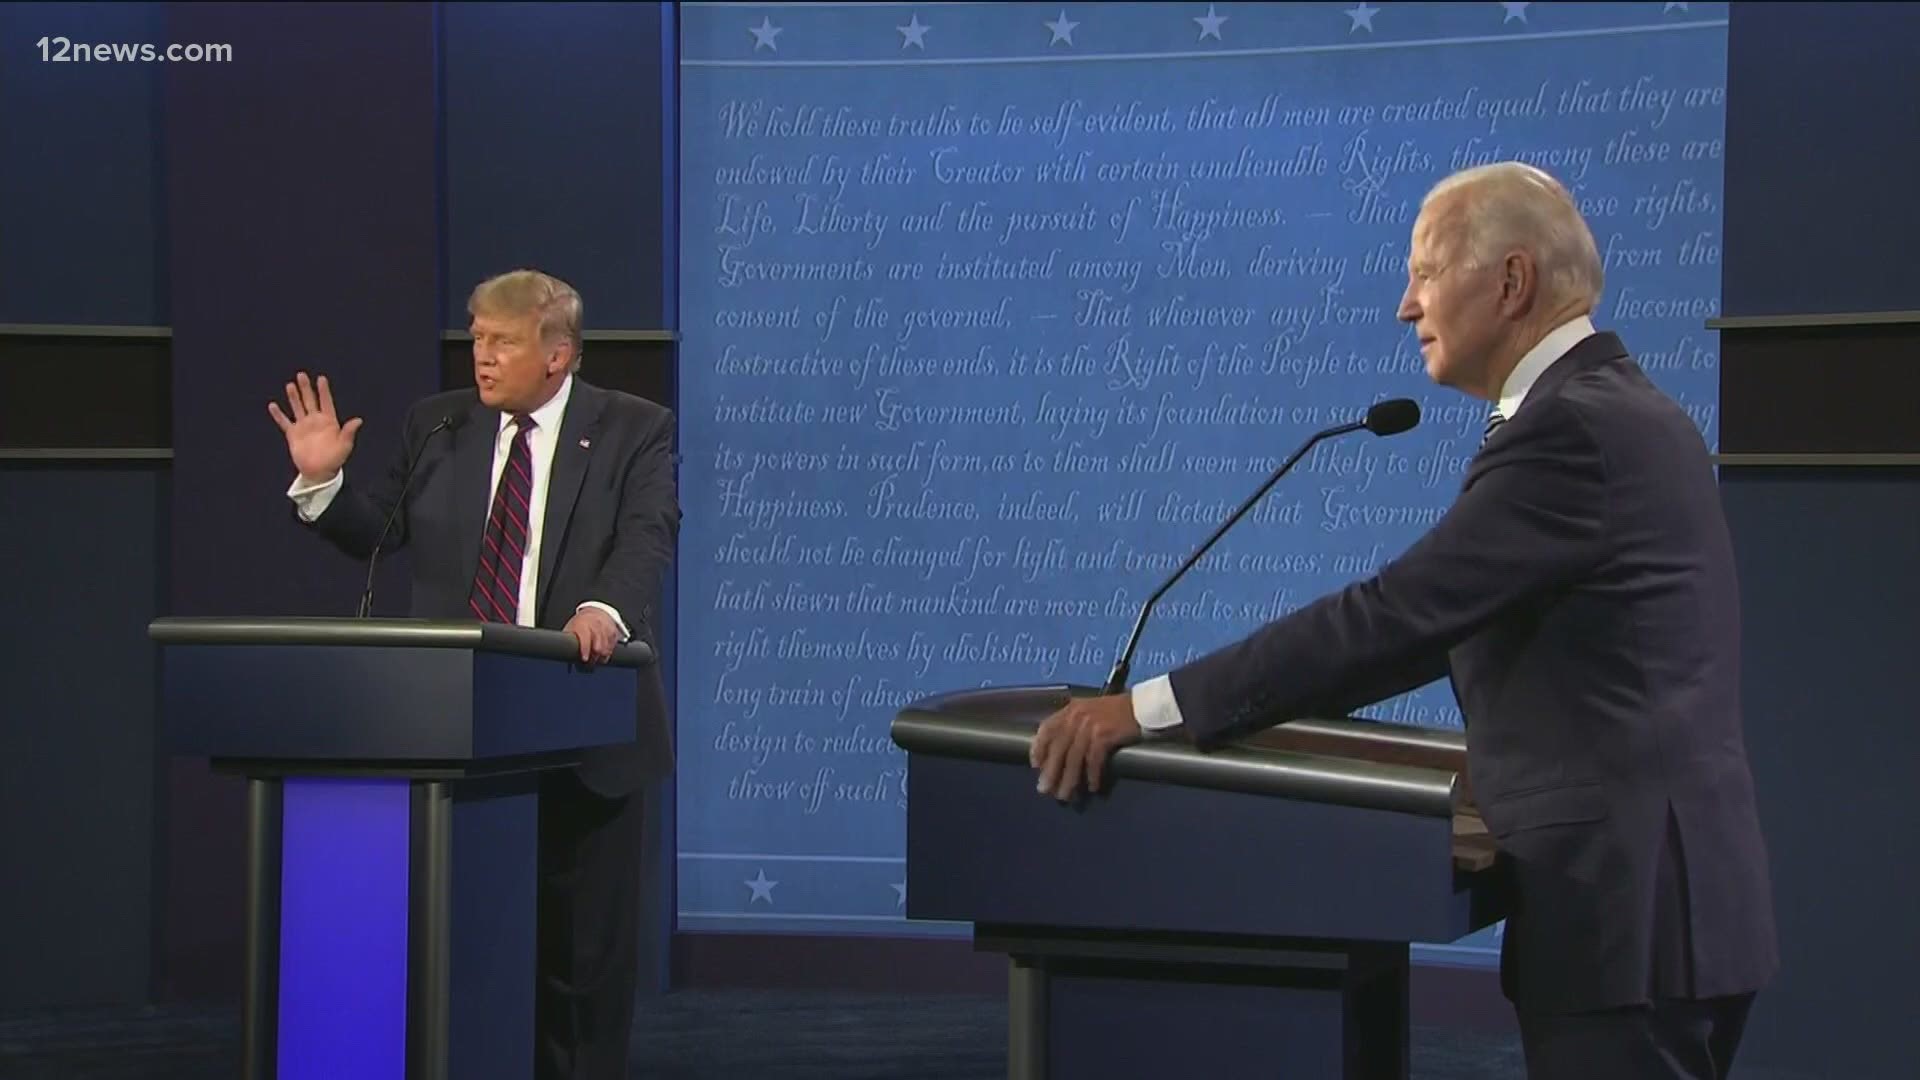 Marked by angry interruptions and bitter accusations, the first debate between President Donald Trump and Joe Biden erupted in contentious exchanges.